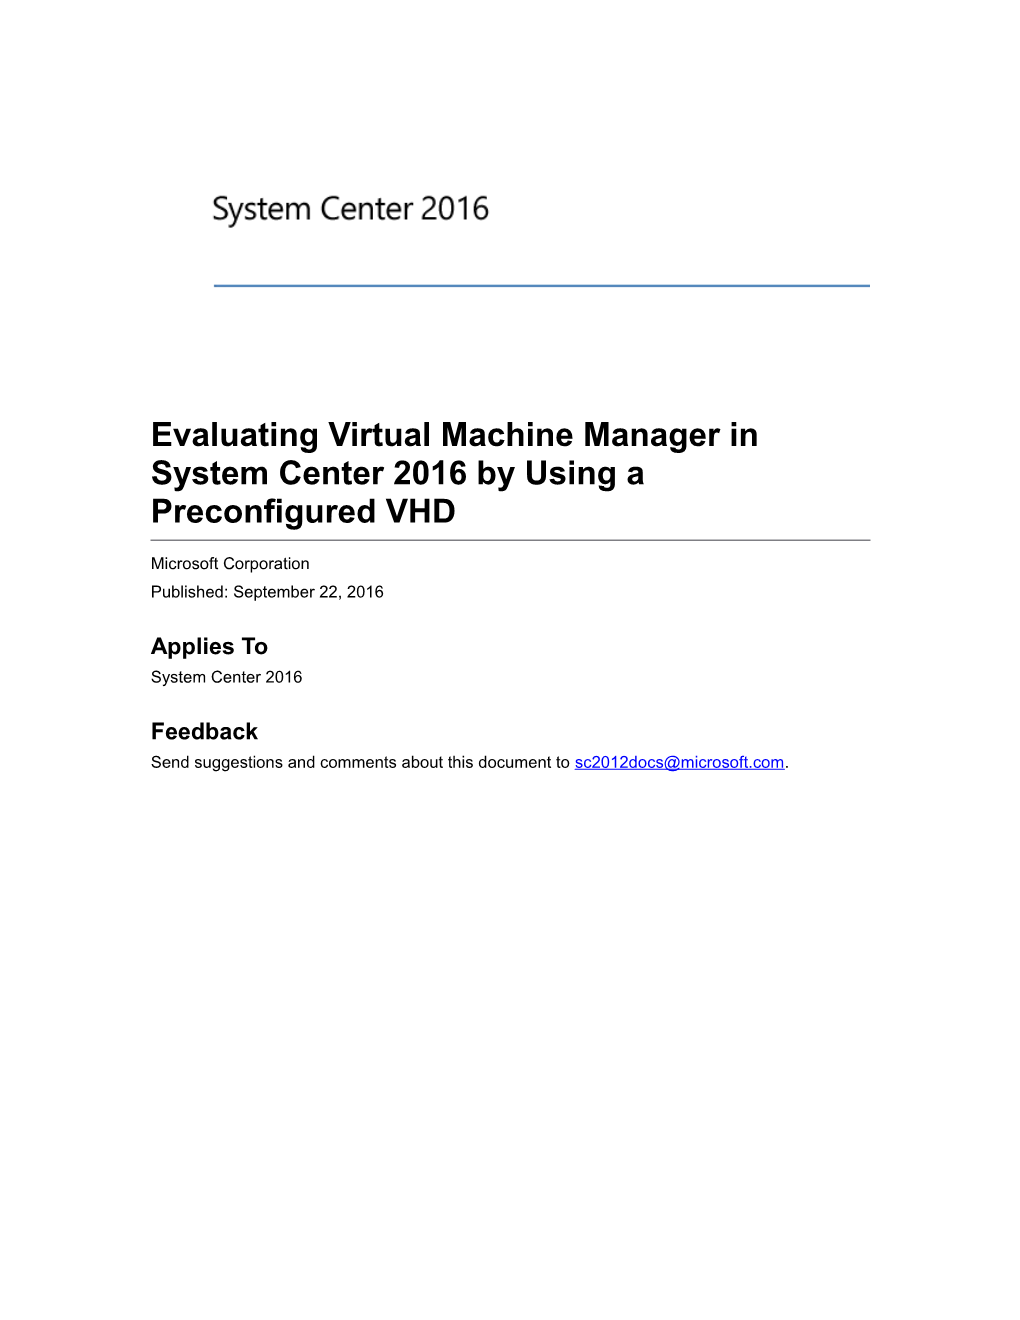 Evaluating Virtual Machine Manager in System Center 2016 by Using a Preconfigured VHD